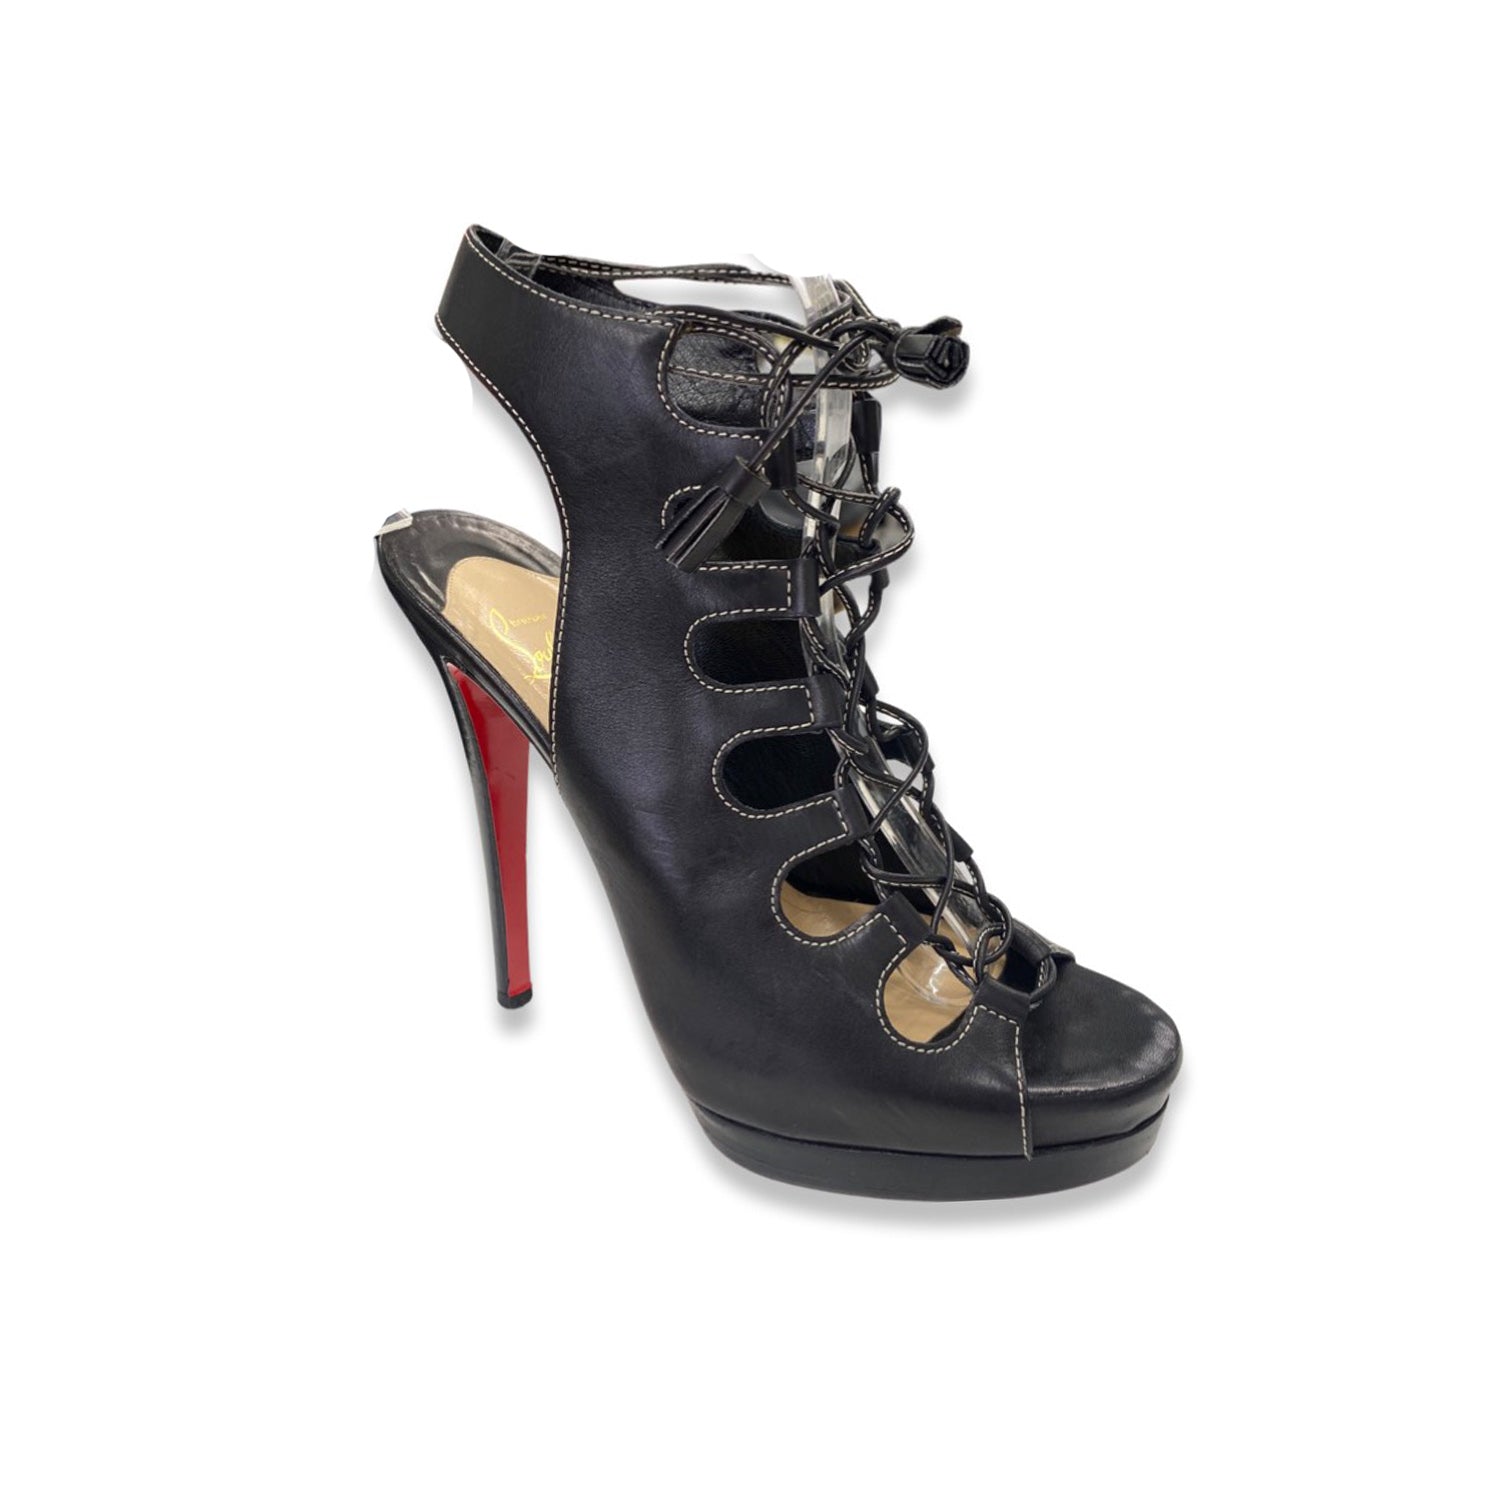 Super High and Sexy Black Christian Louboutin Leather Strappy Heels Size  38.5 | eBay